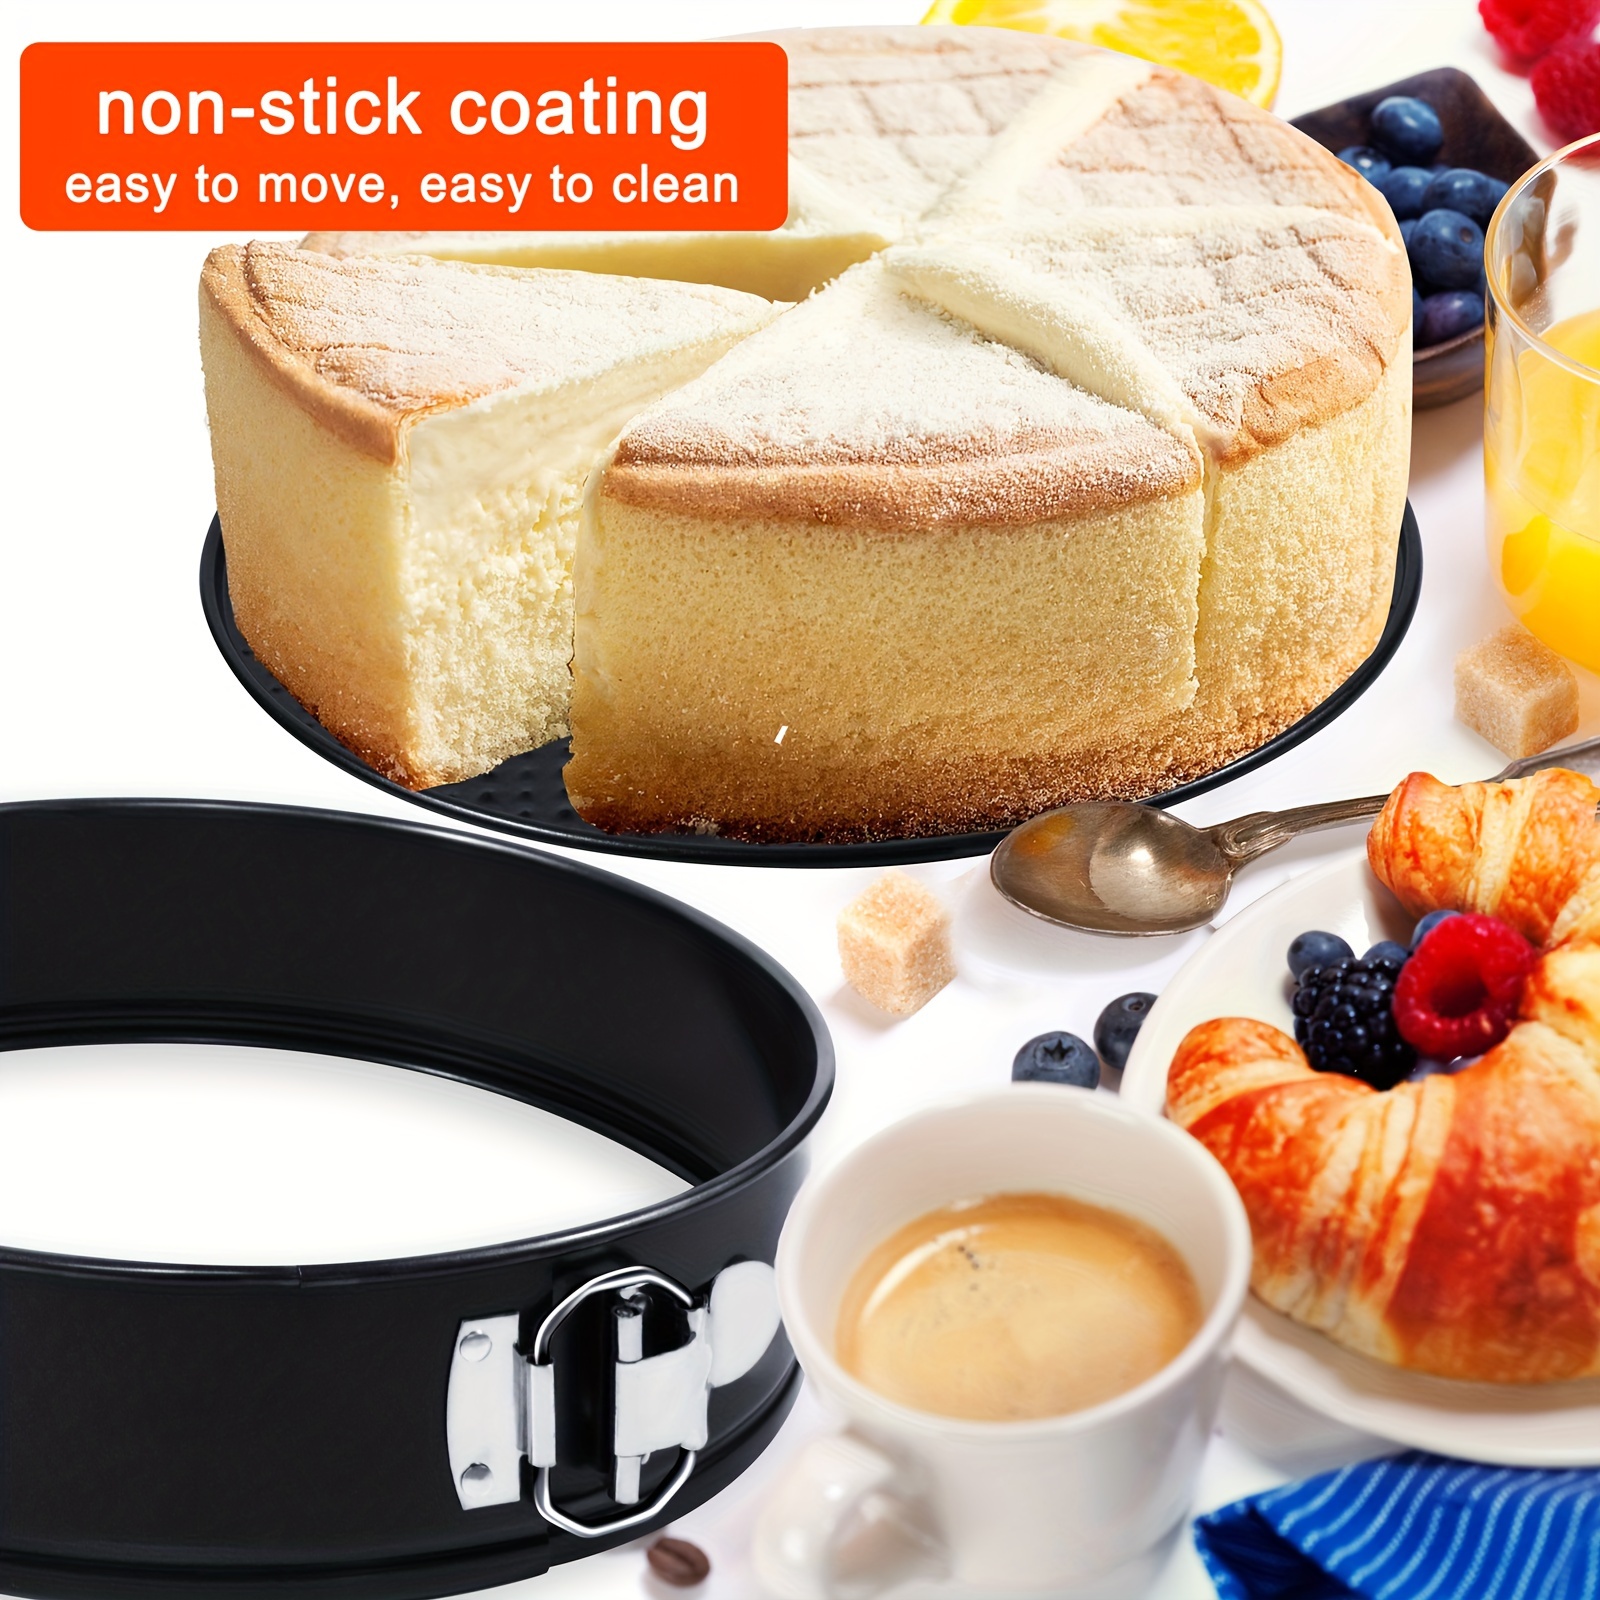 Springform Pan - Nonstick Cheesecake Pan with Removable Bottom